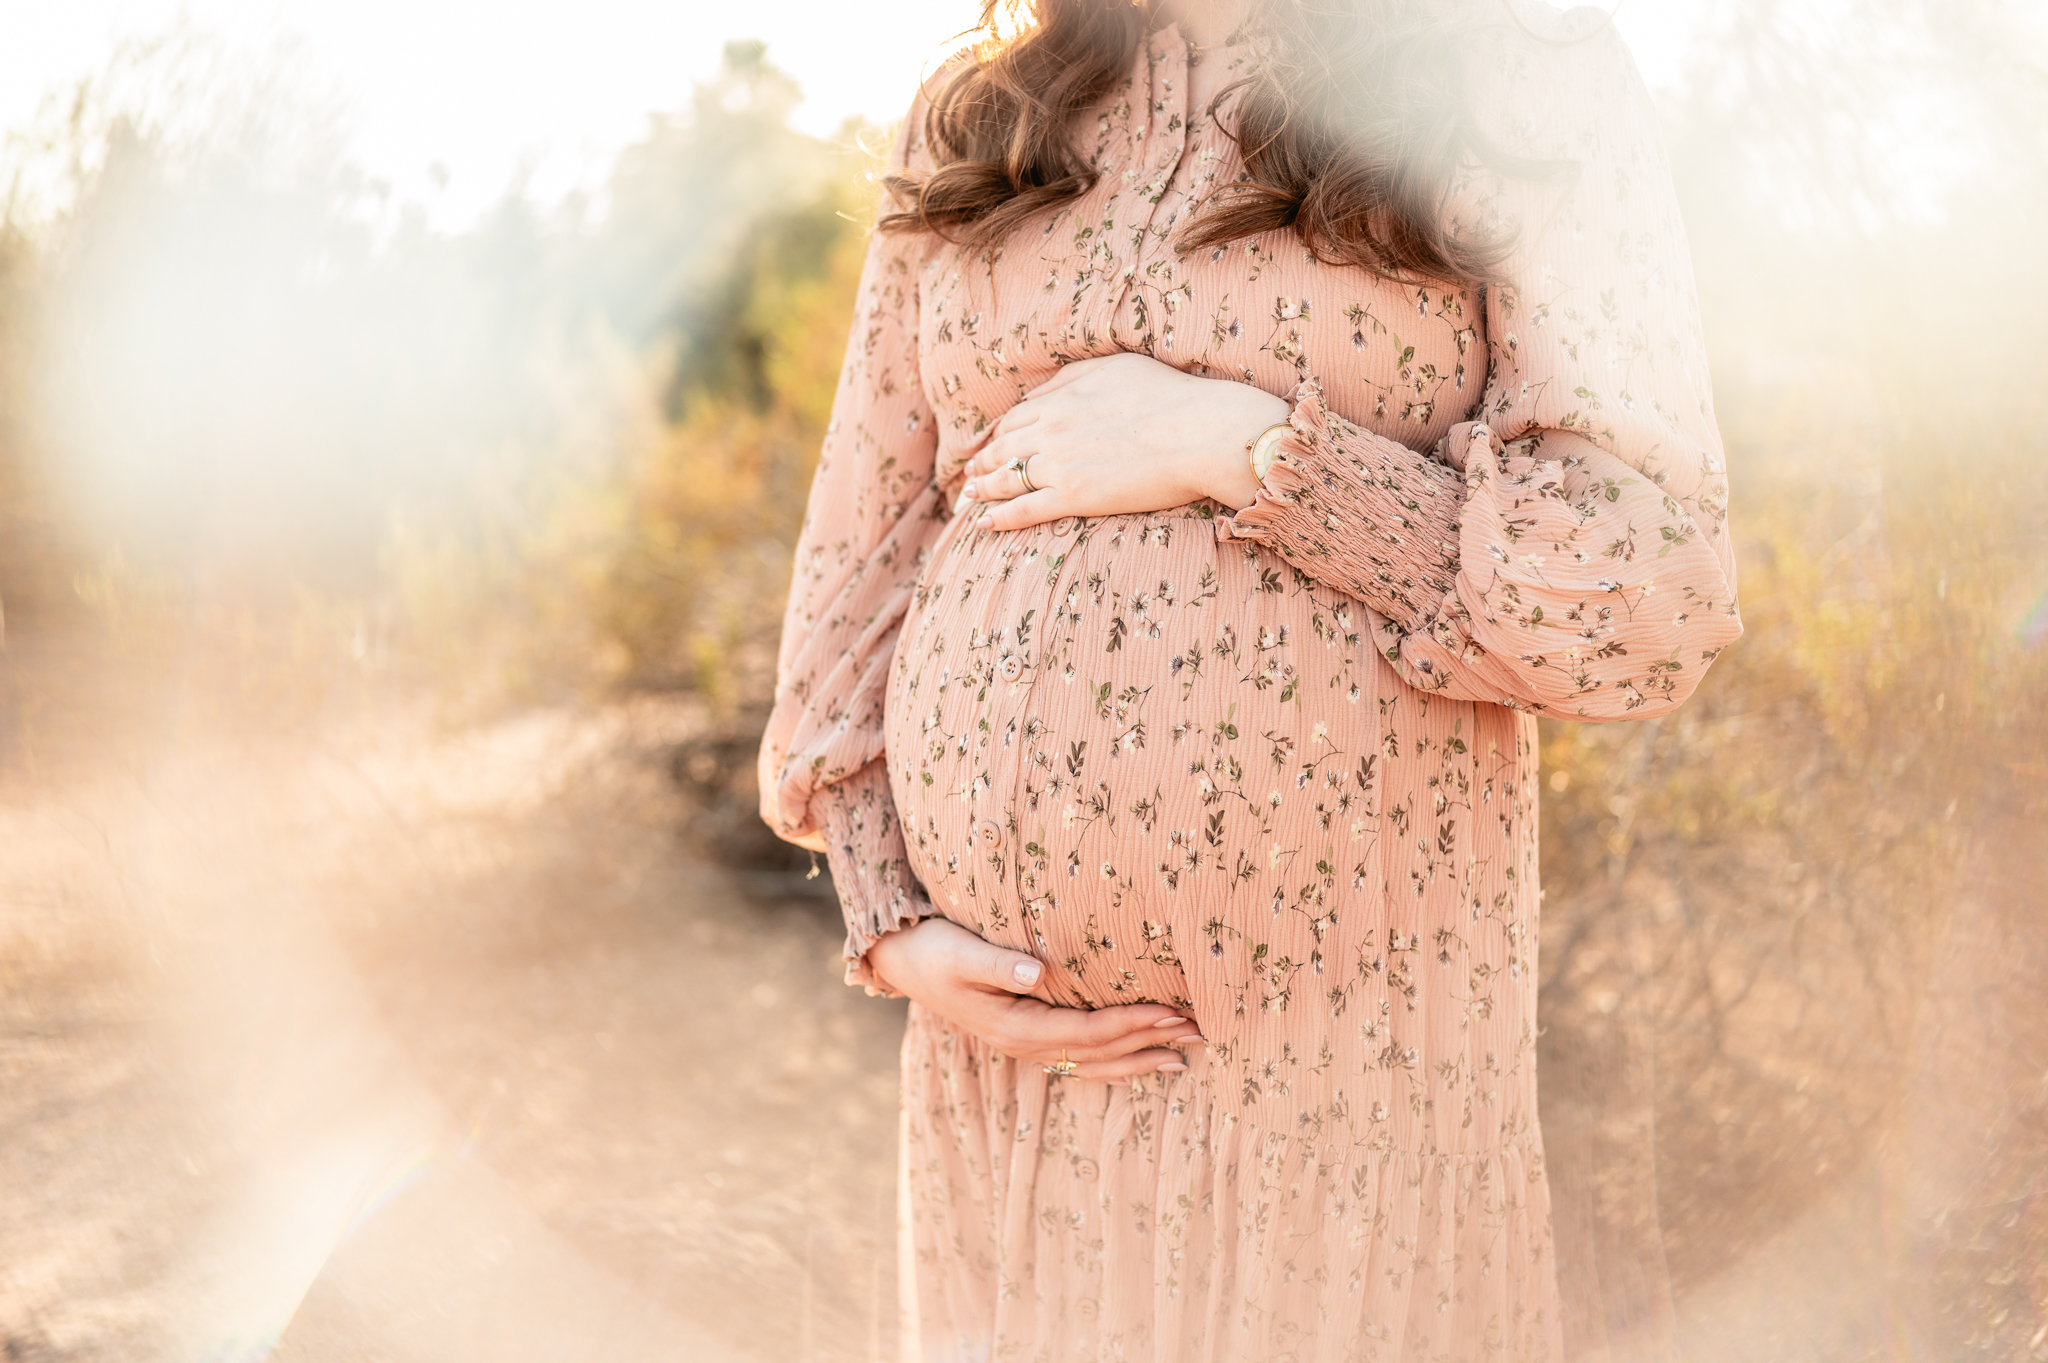 mother caresses her pregnant stomach while wrapped in soft light outdoors